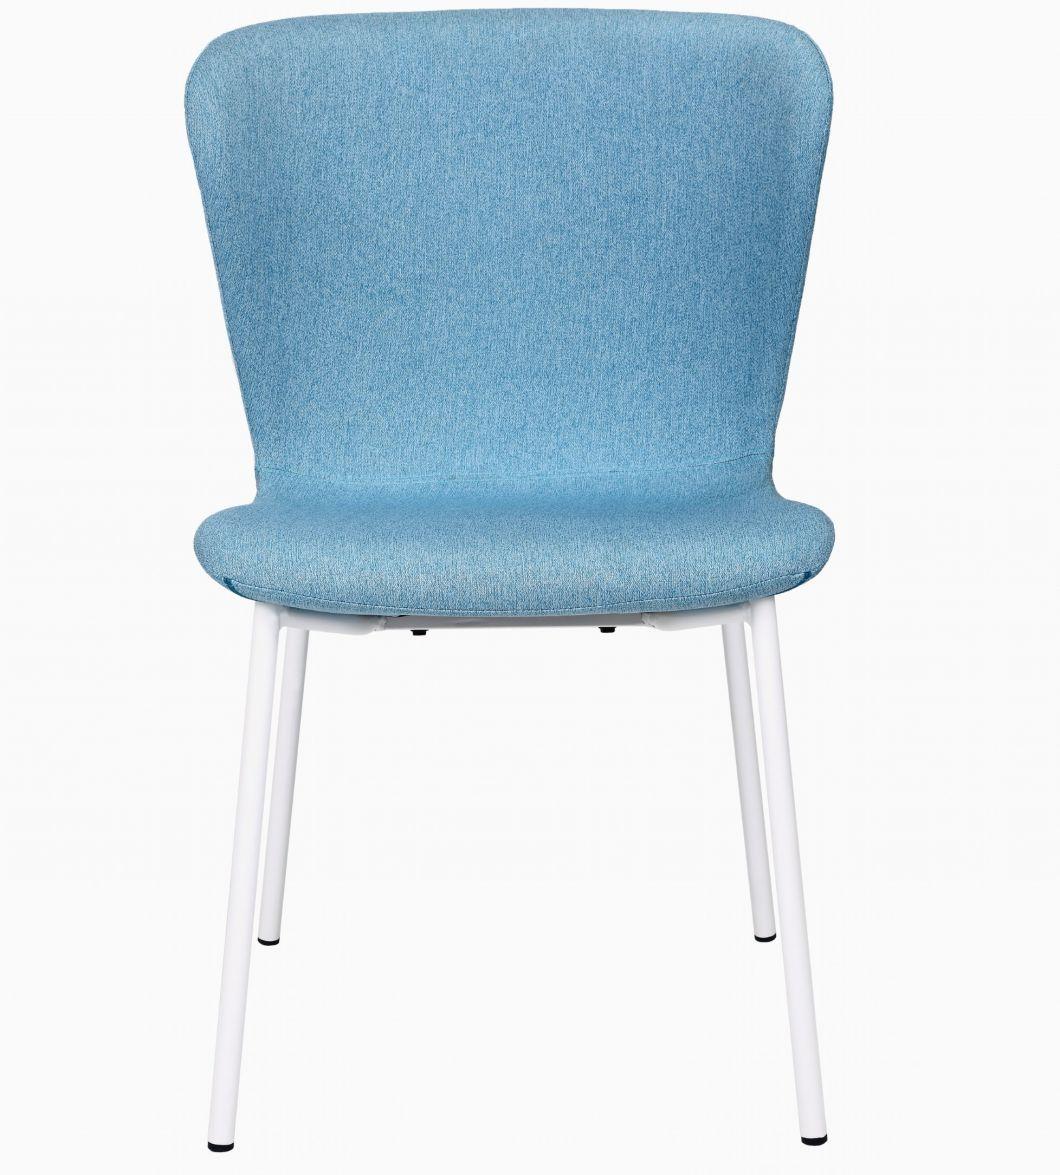 Chinese Chair Supplier Moulded Injection Foam Soft Dining Chair